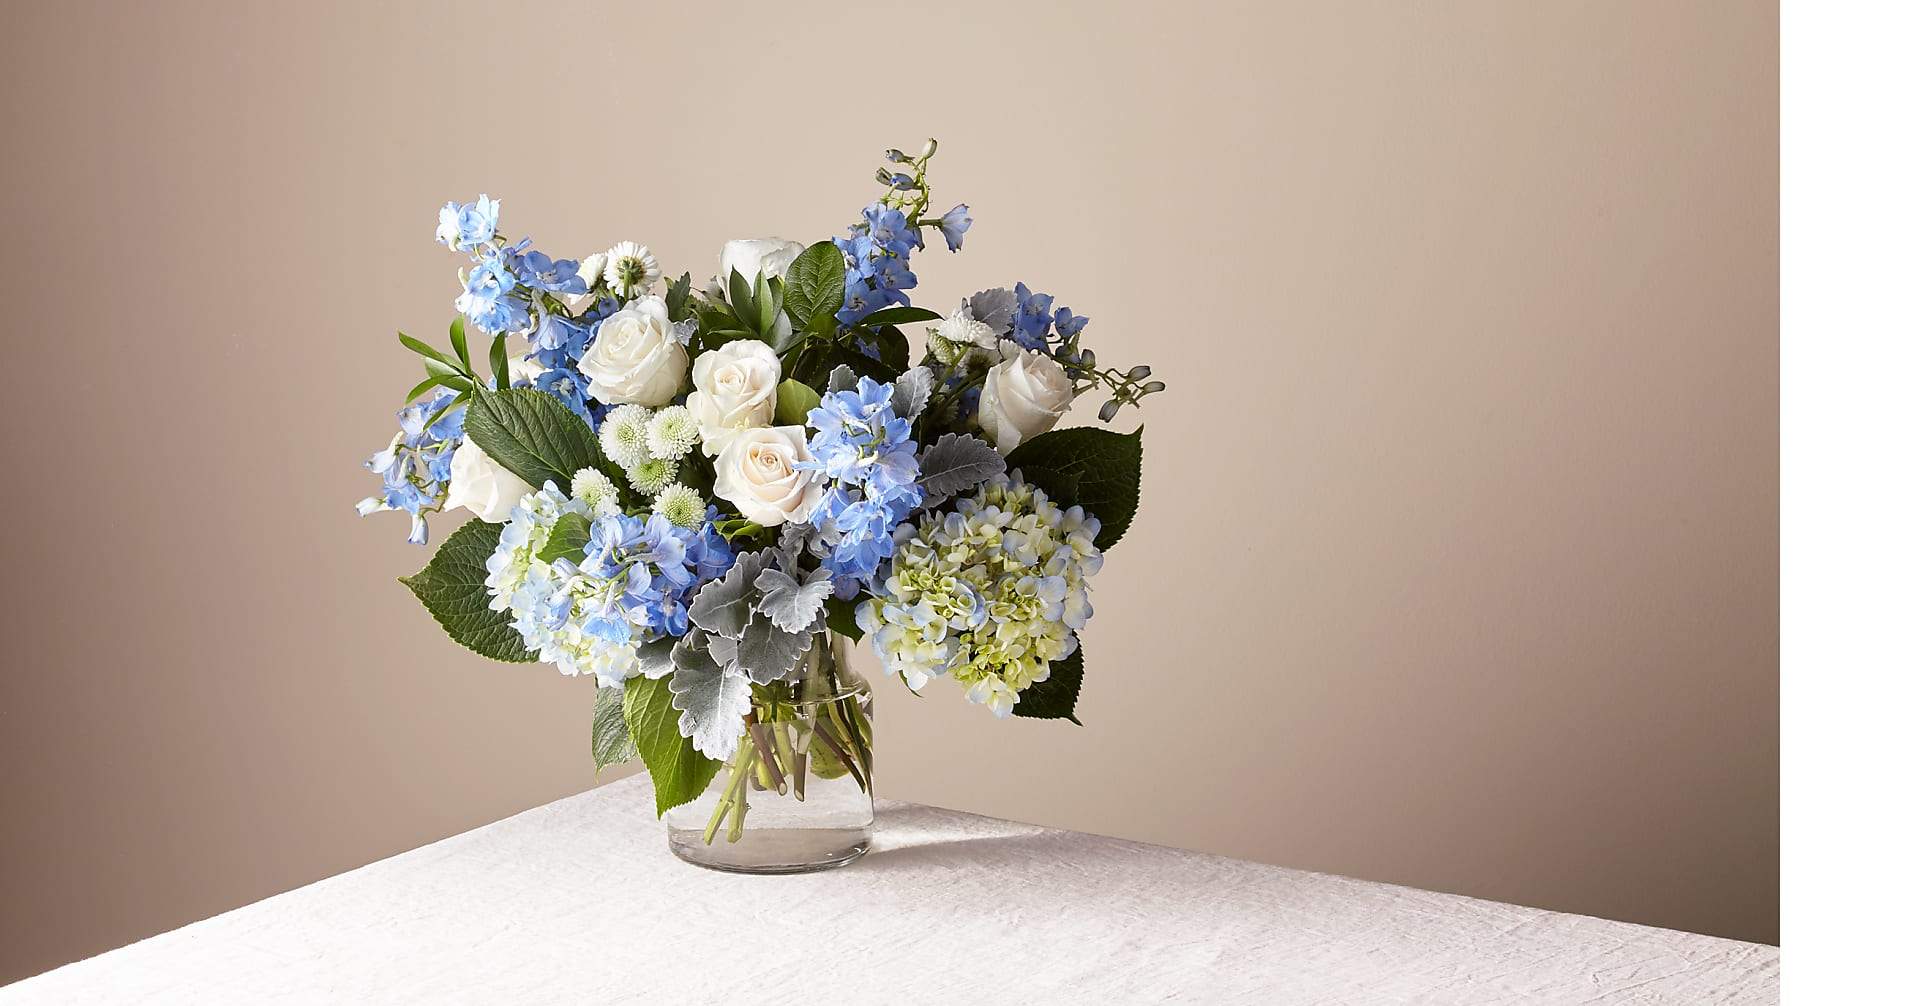 Luxury Clear Skies Bouquet - Let this uplifting arrangement be reminders of the clear skies ahead. Capturing the feeling of hope that a new day brings, this bouquet is composed of voluminous hydrangea blooms and vibrant belladonna delphinium to refresh their mood.